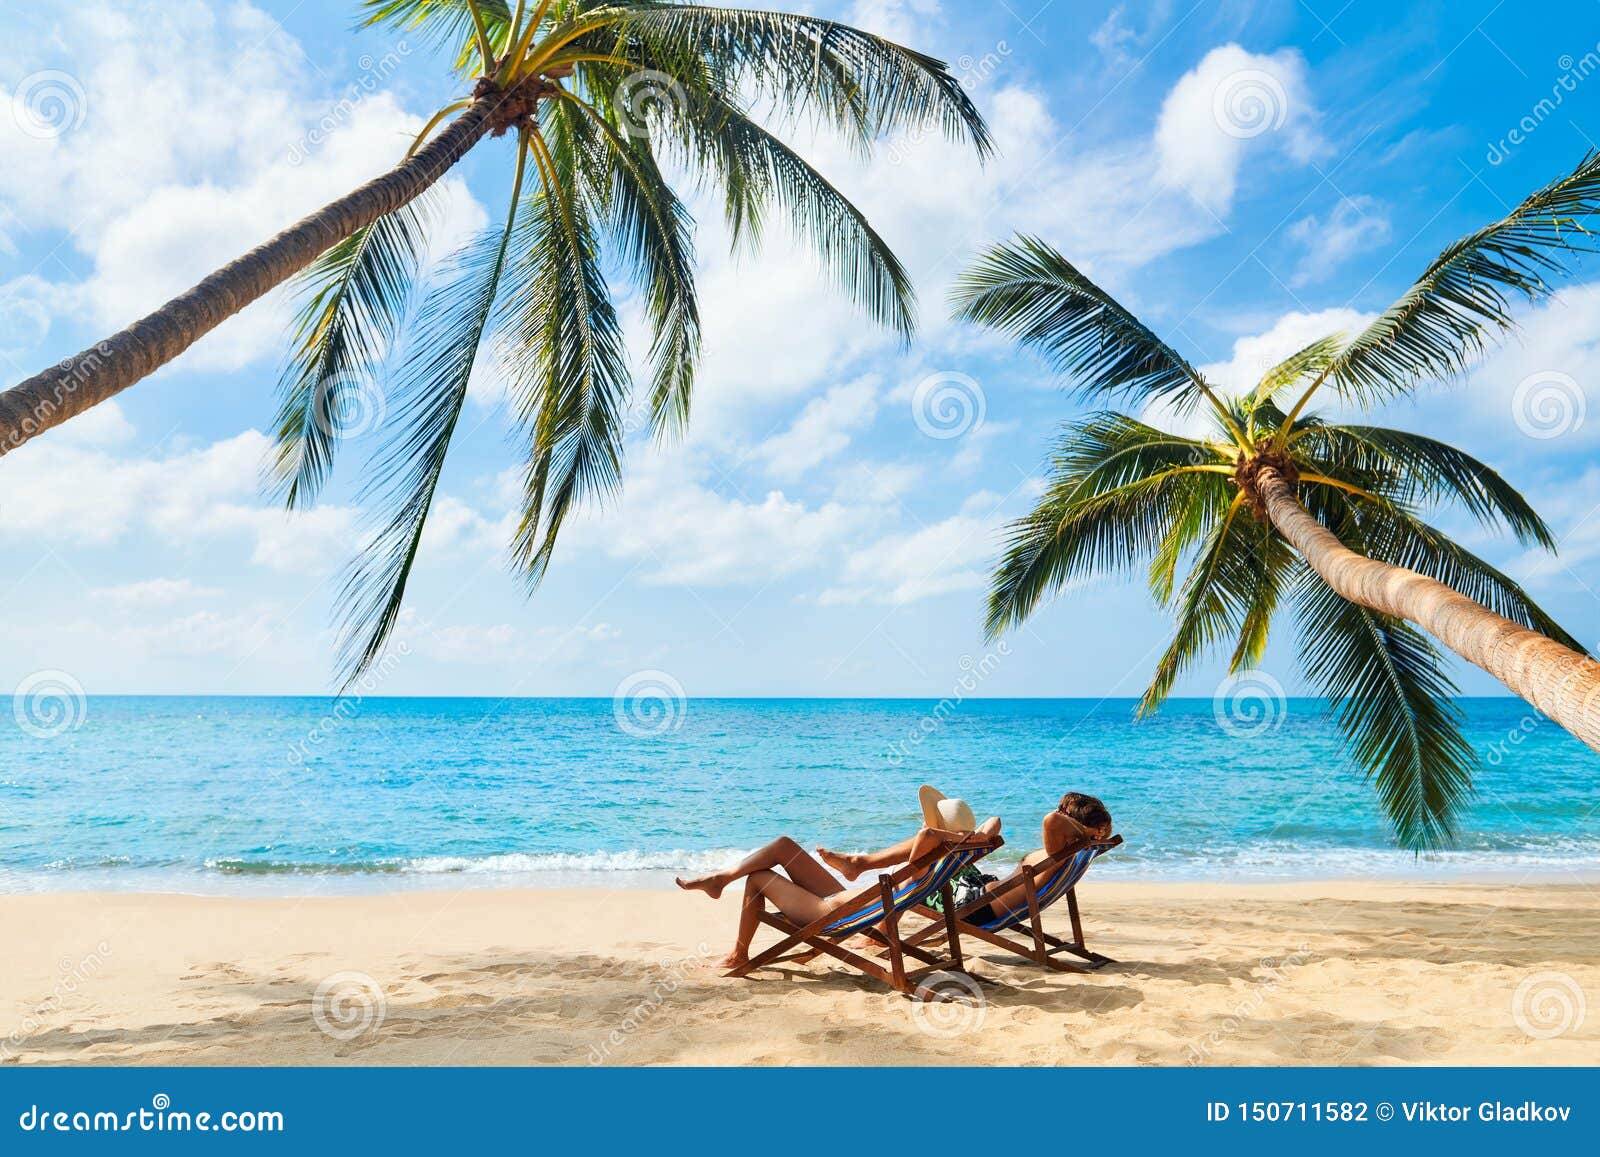 Couple Relax on the Beach Enjoying Beautiful Sea on the Tropical